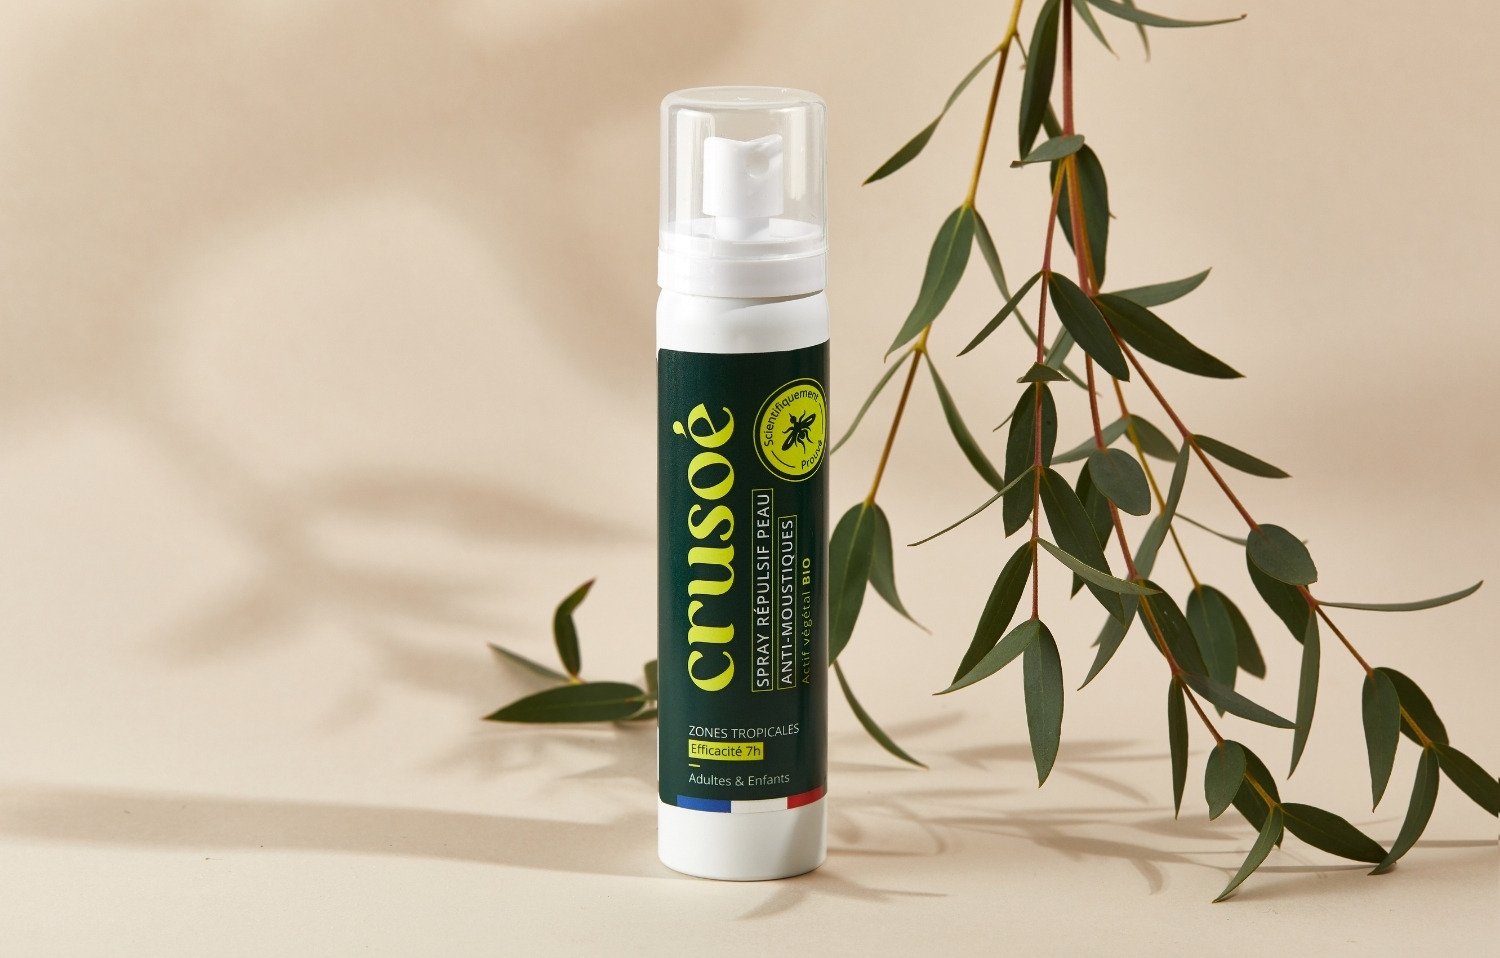 The power of nature and science in a 100% natural and effective organic mosquito spray.